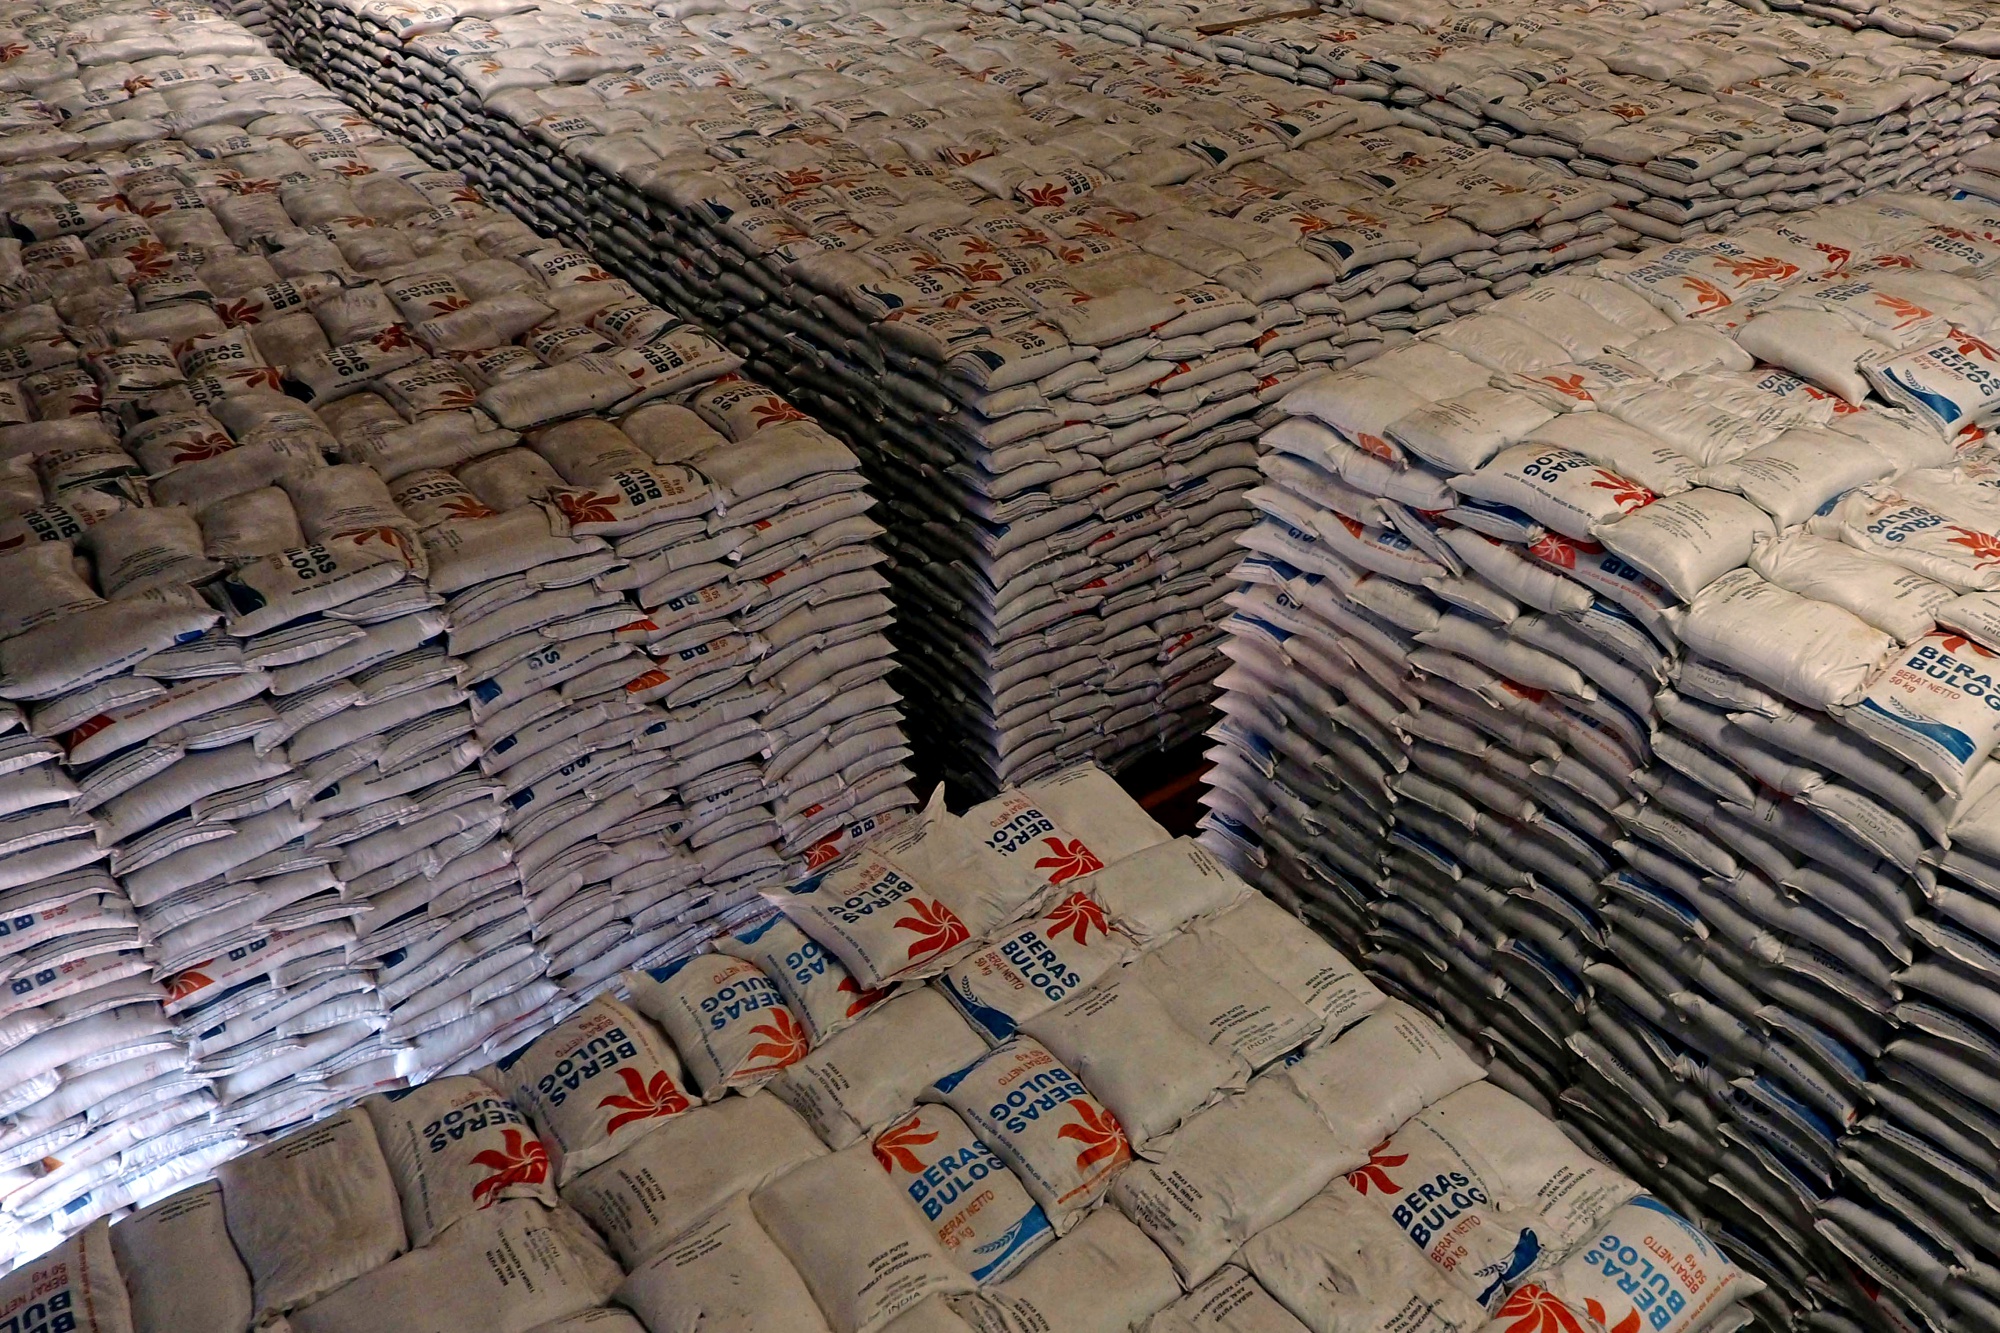 Sacks of rice at a warehouse in Indonesia.